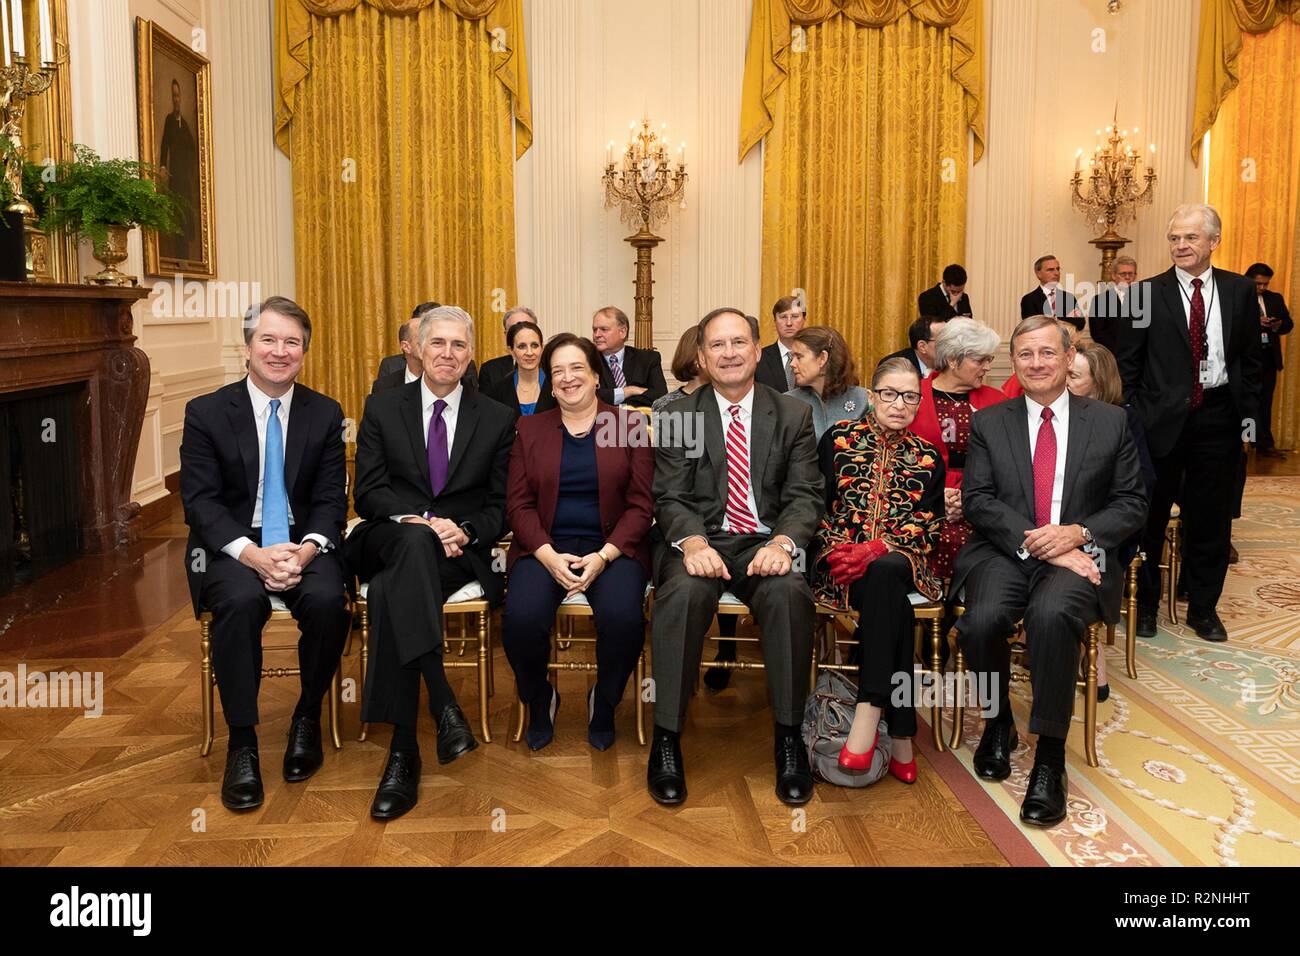 Justices of the U.S. Supreme Court attend the Presidential Medal of Freedom award ceremony in the East Room of the White House November 16, 2018 in Washington, D.C. Sitting from left to right are: Brett Kavanaugh, Neil Gorsuch, Elena Kagan, Samuel Alito, Ruth Bader Ginsburg and Chief Justice John Roberts. Stock Photo